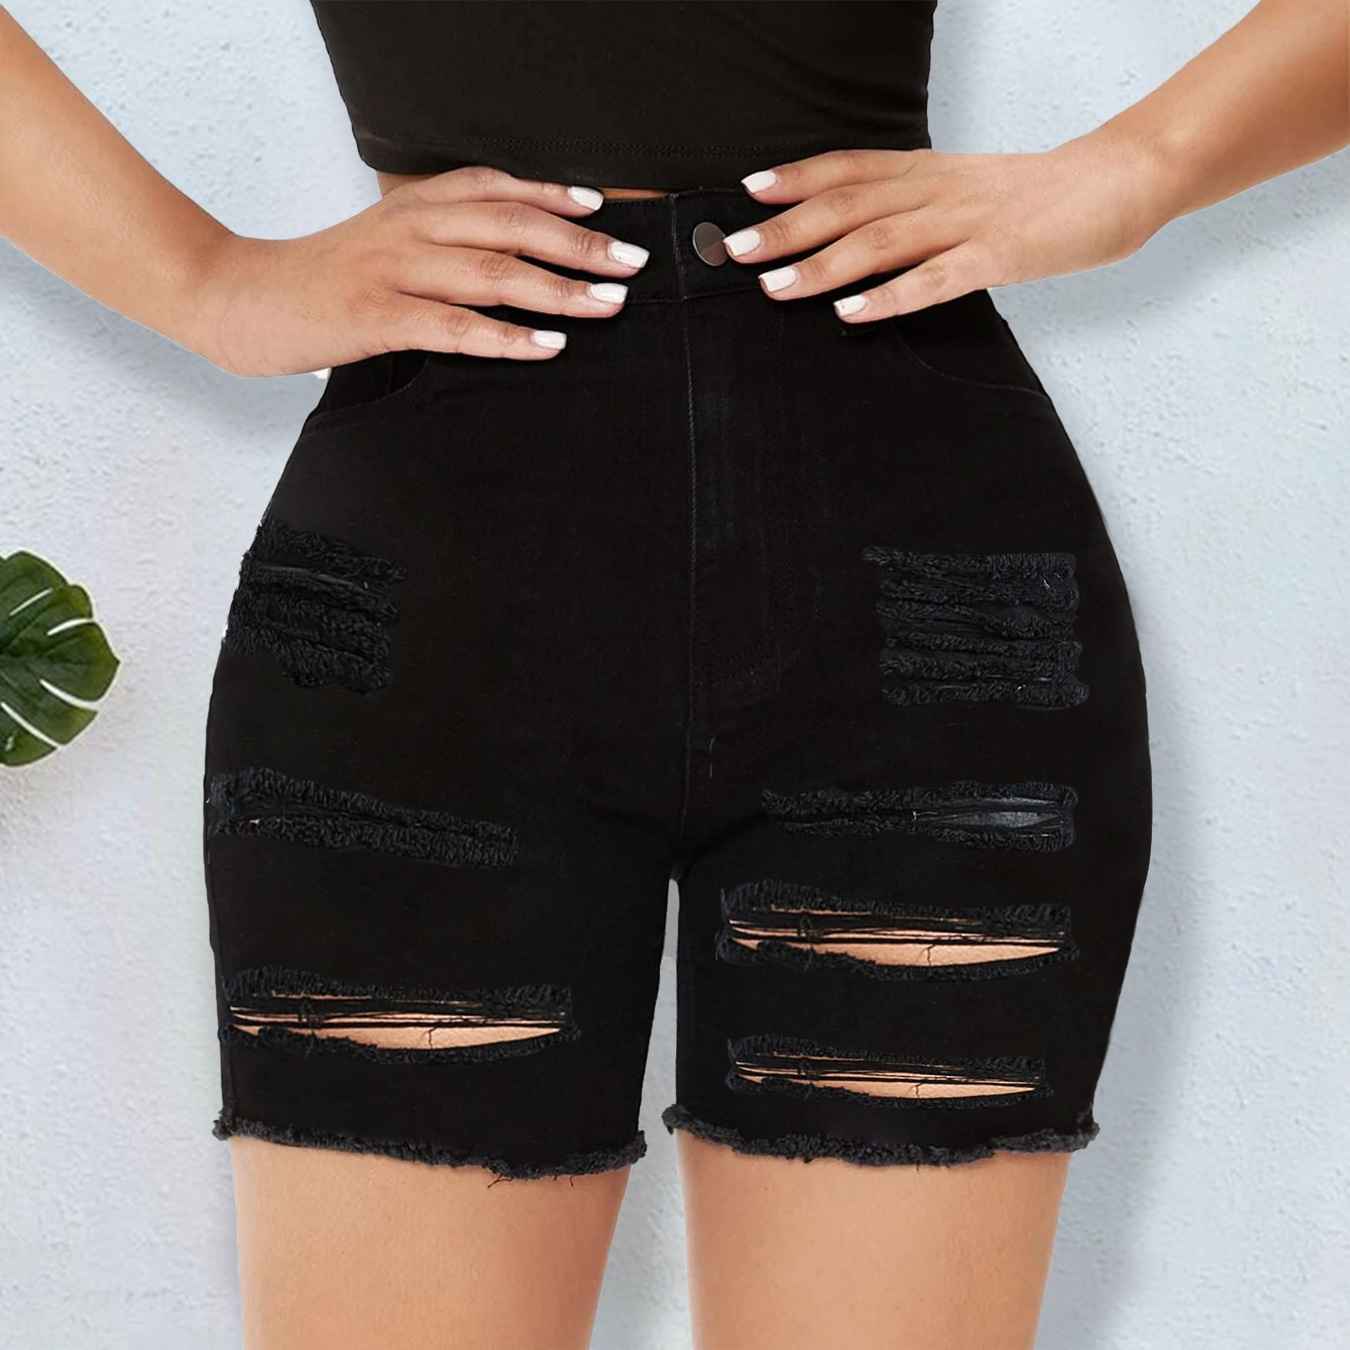 Zt60464# Foreign Trade European and American Women's Clothing Jeans Amazon AliExpress High Waist Slim Ripped Denim Shorts for Women